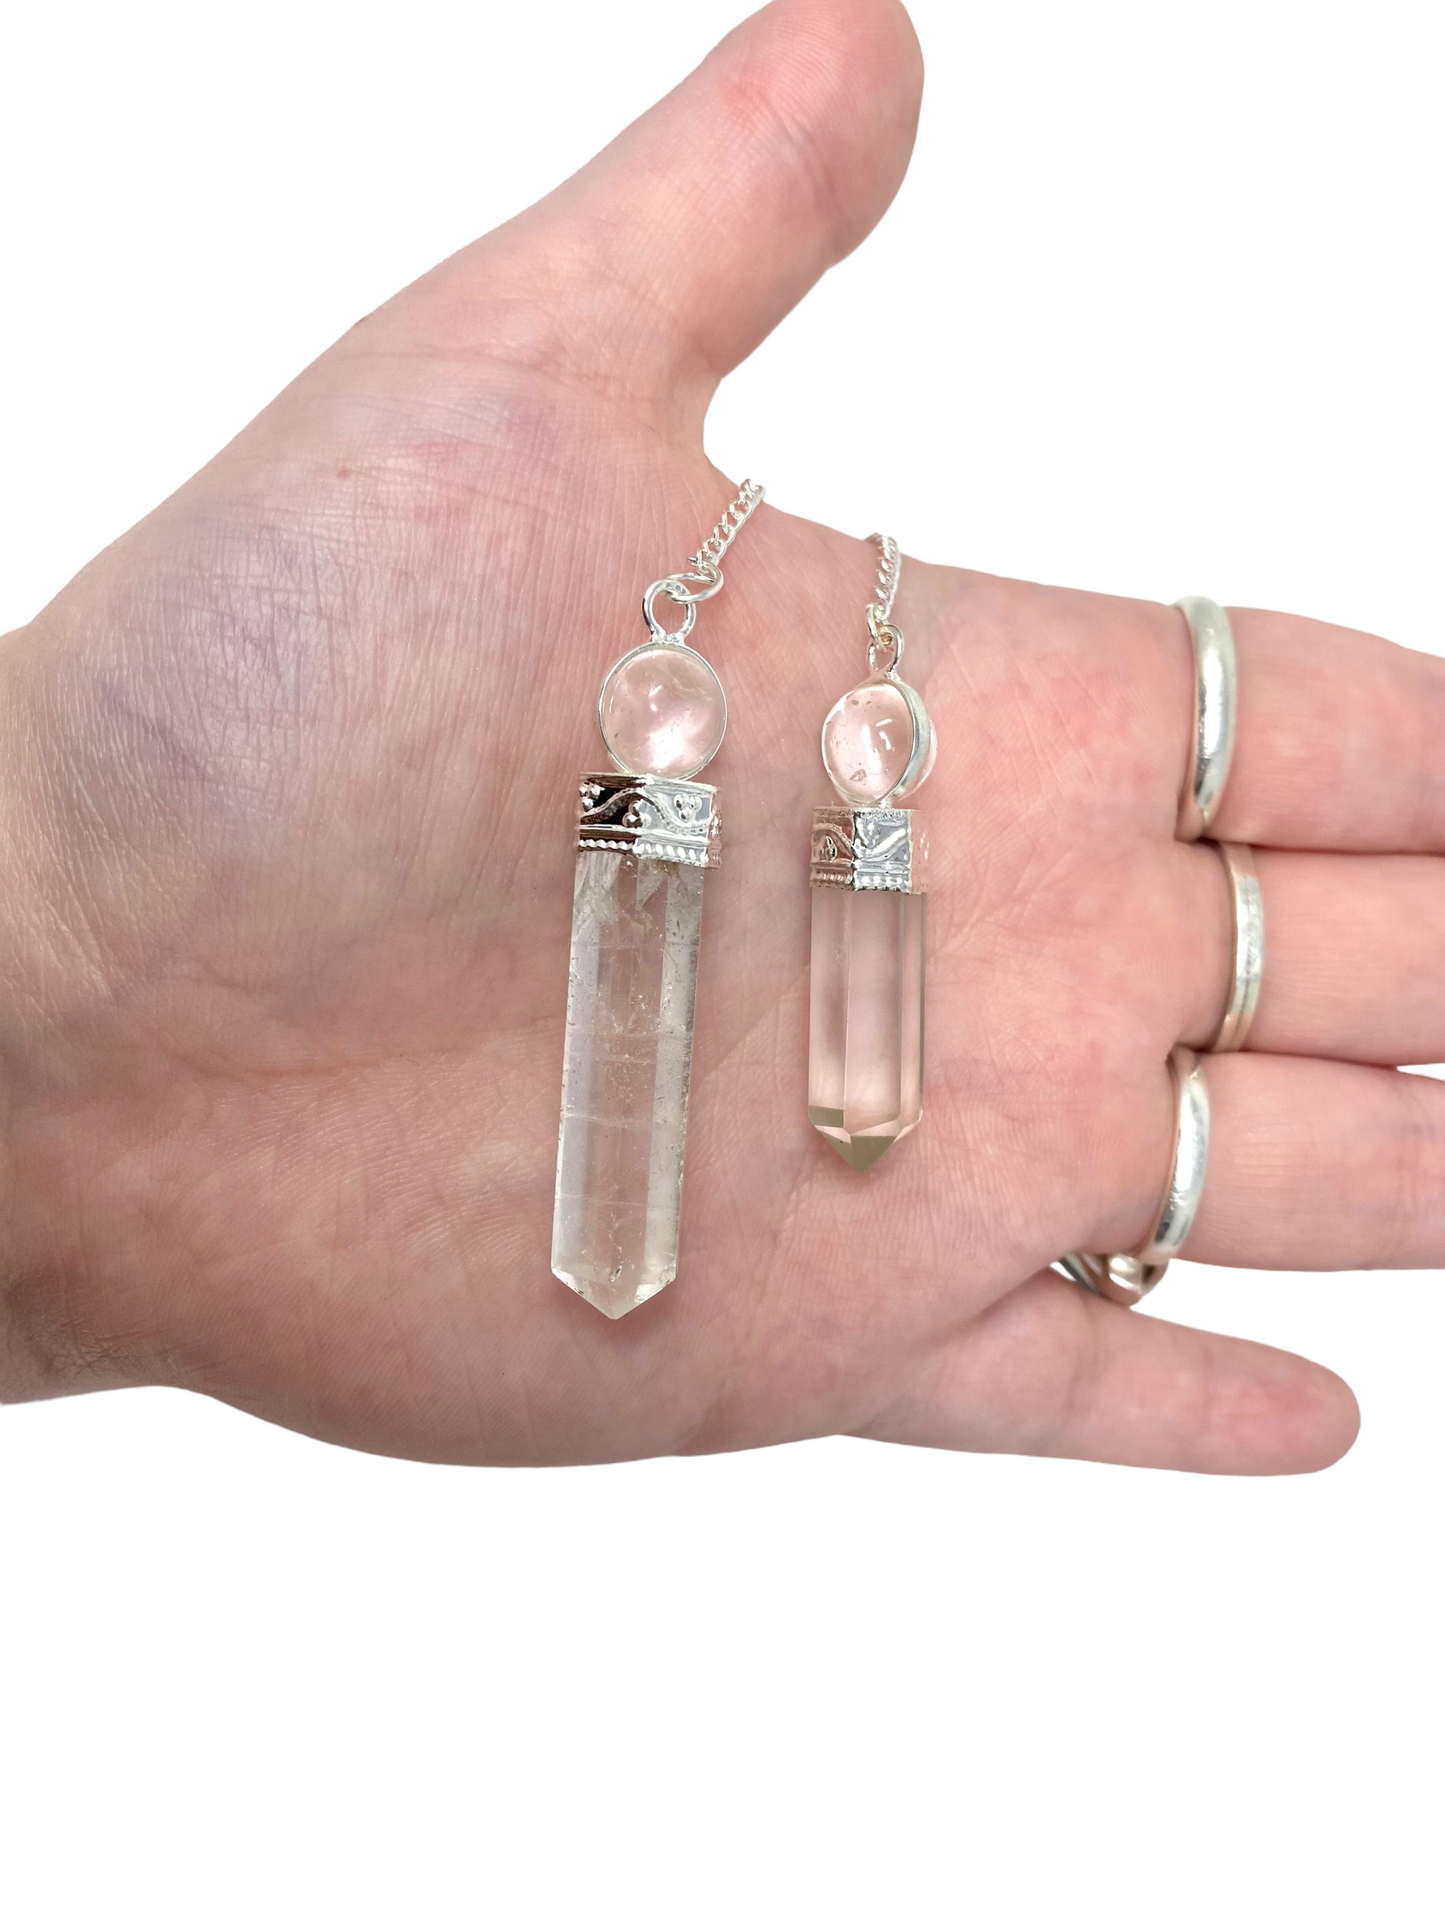 Crystal Pendulum with Crystal Ball and chain